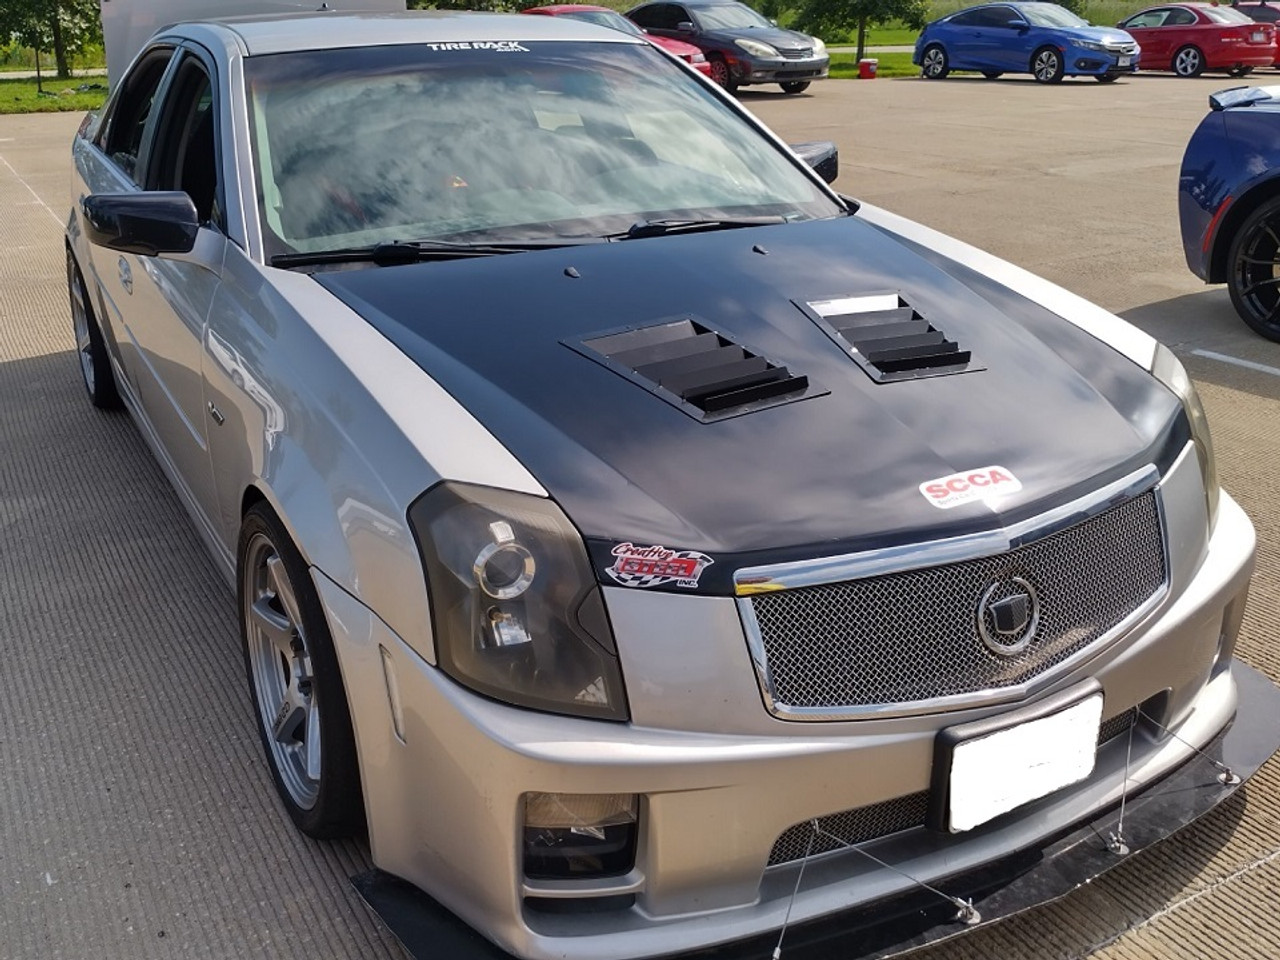 Race Louver RT trim mid pair car hood extractor is designed for street, high performance driving and track duty.